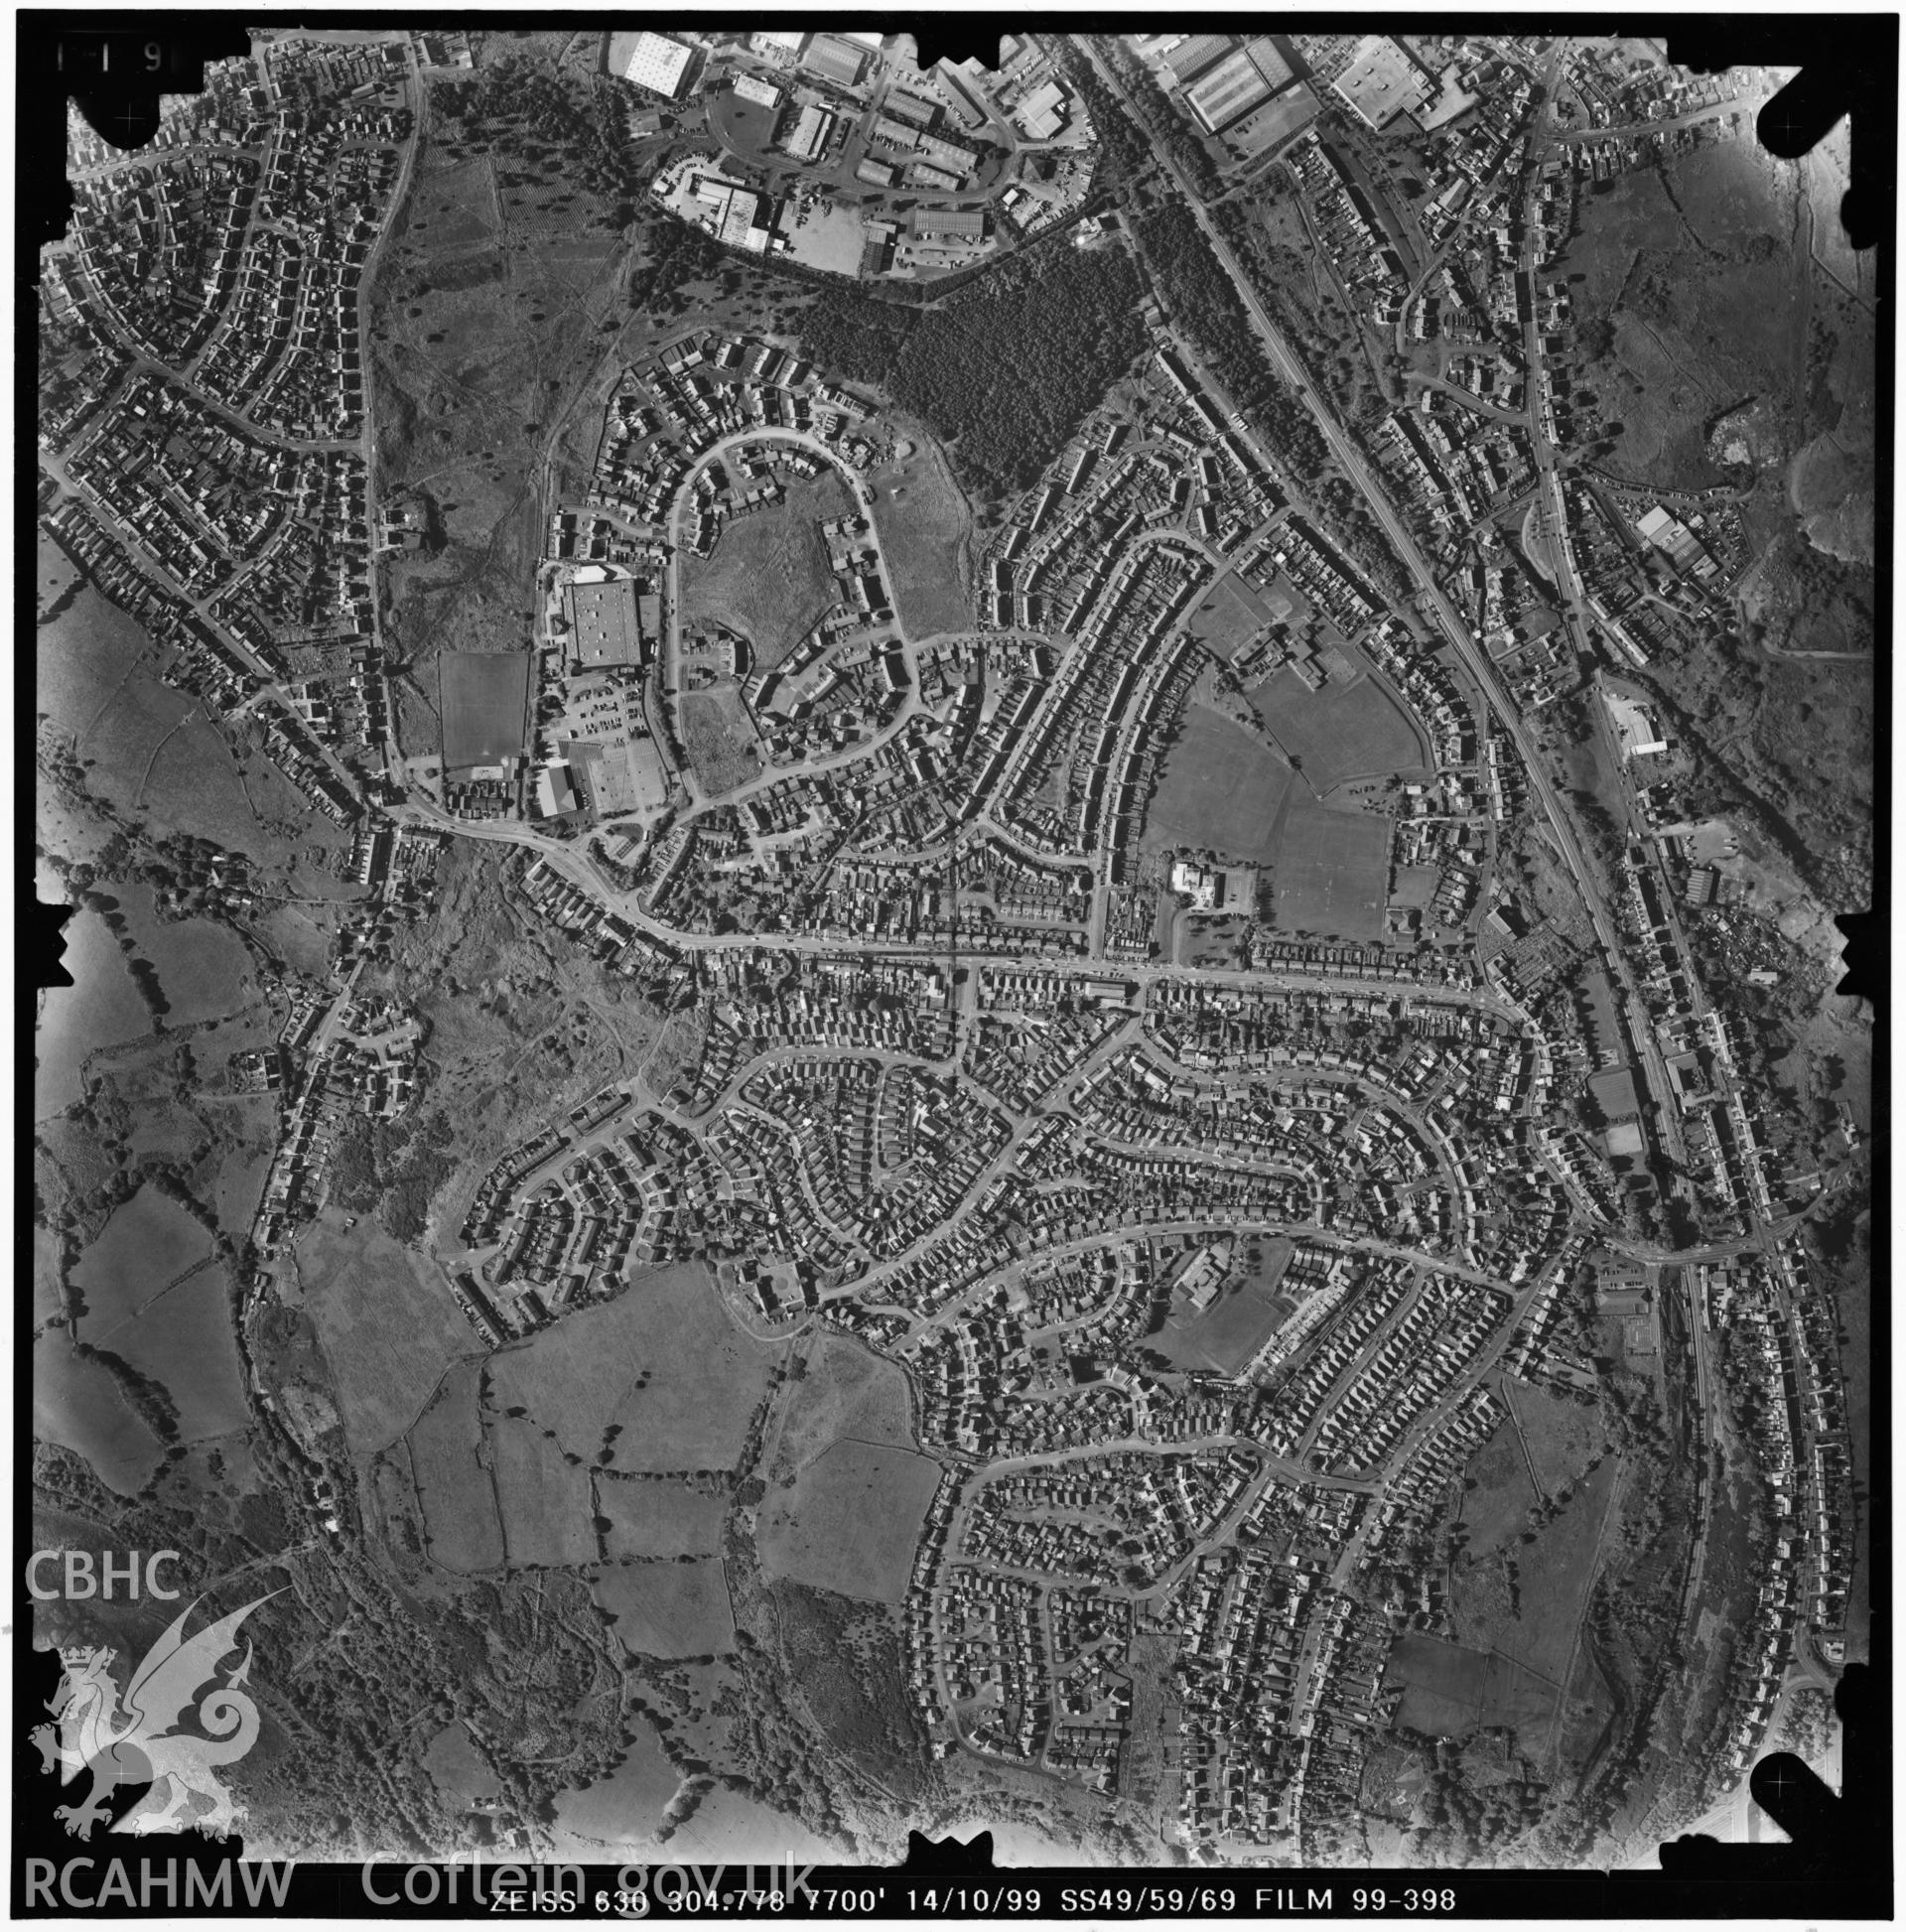 Digitized copy of an aerial photograph showing the Trallwn area of Swansea, taken by Ordnance Survey, Oct 1999.